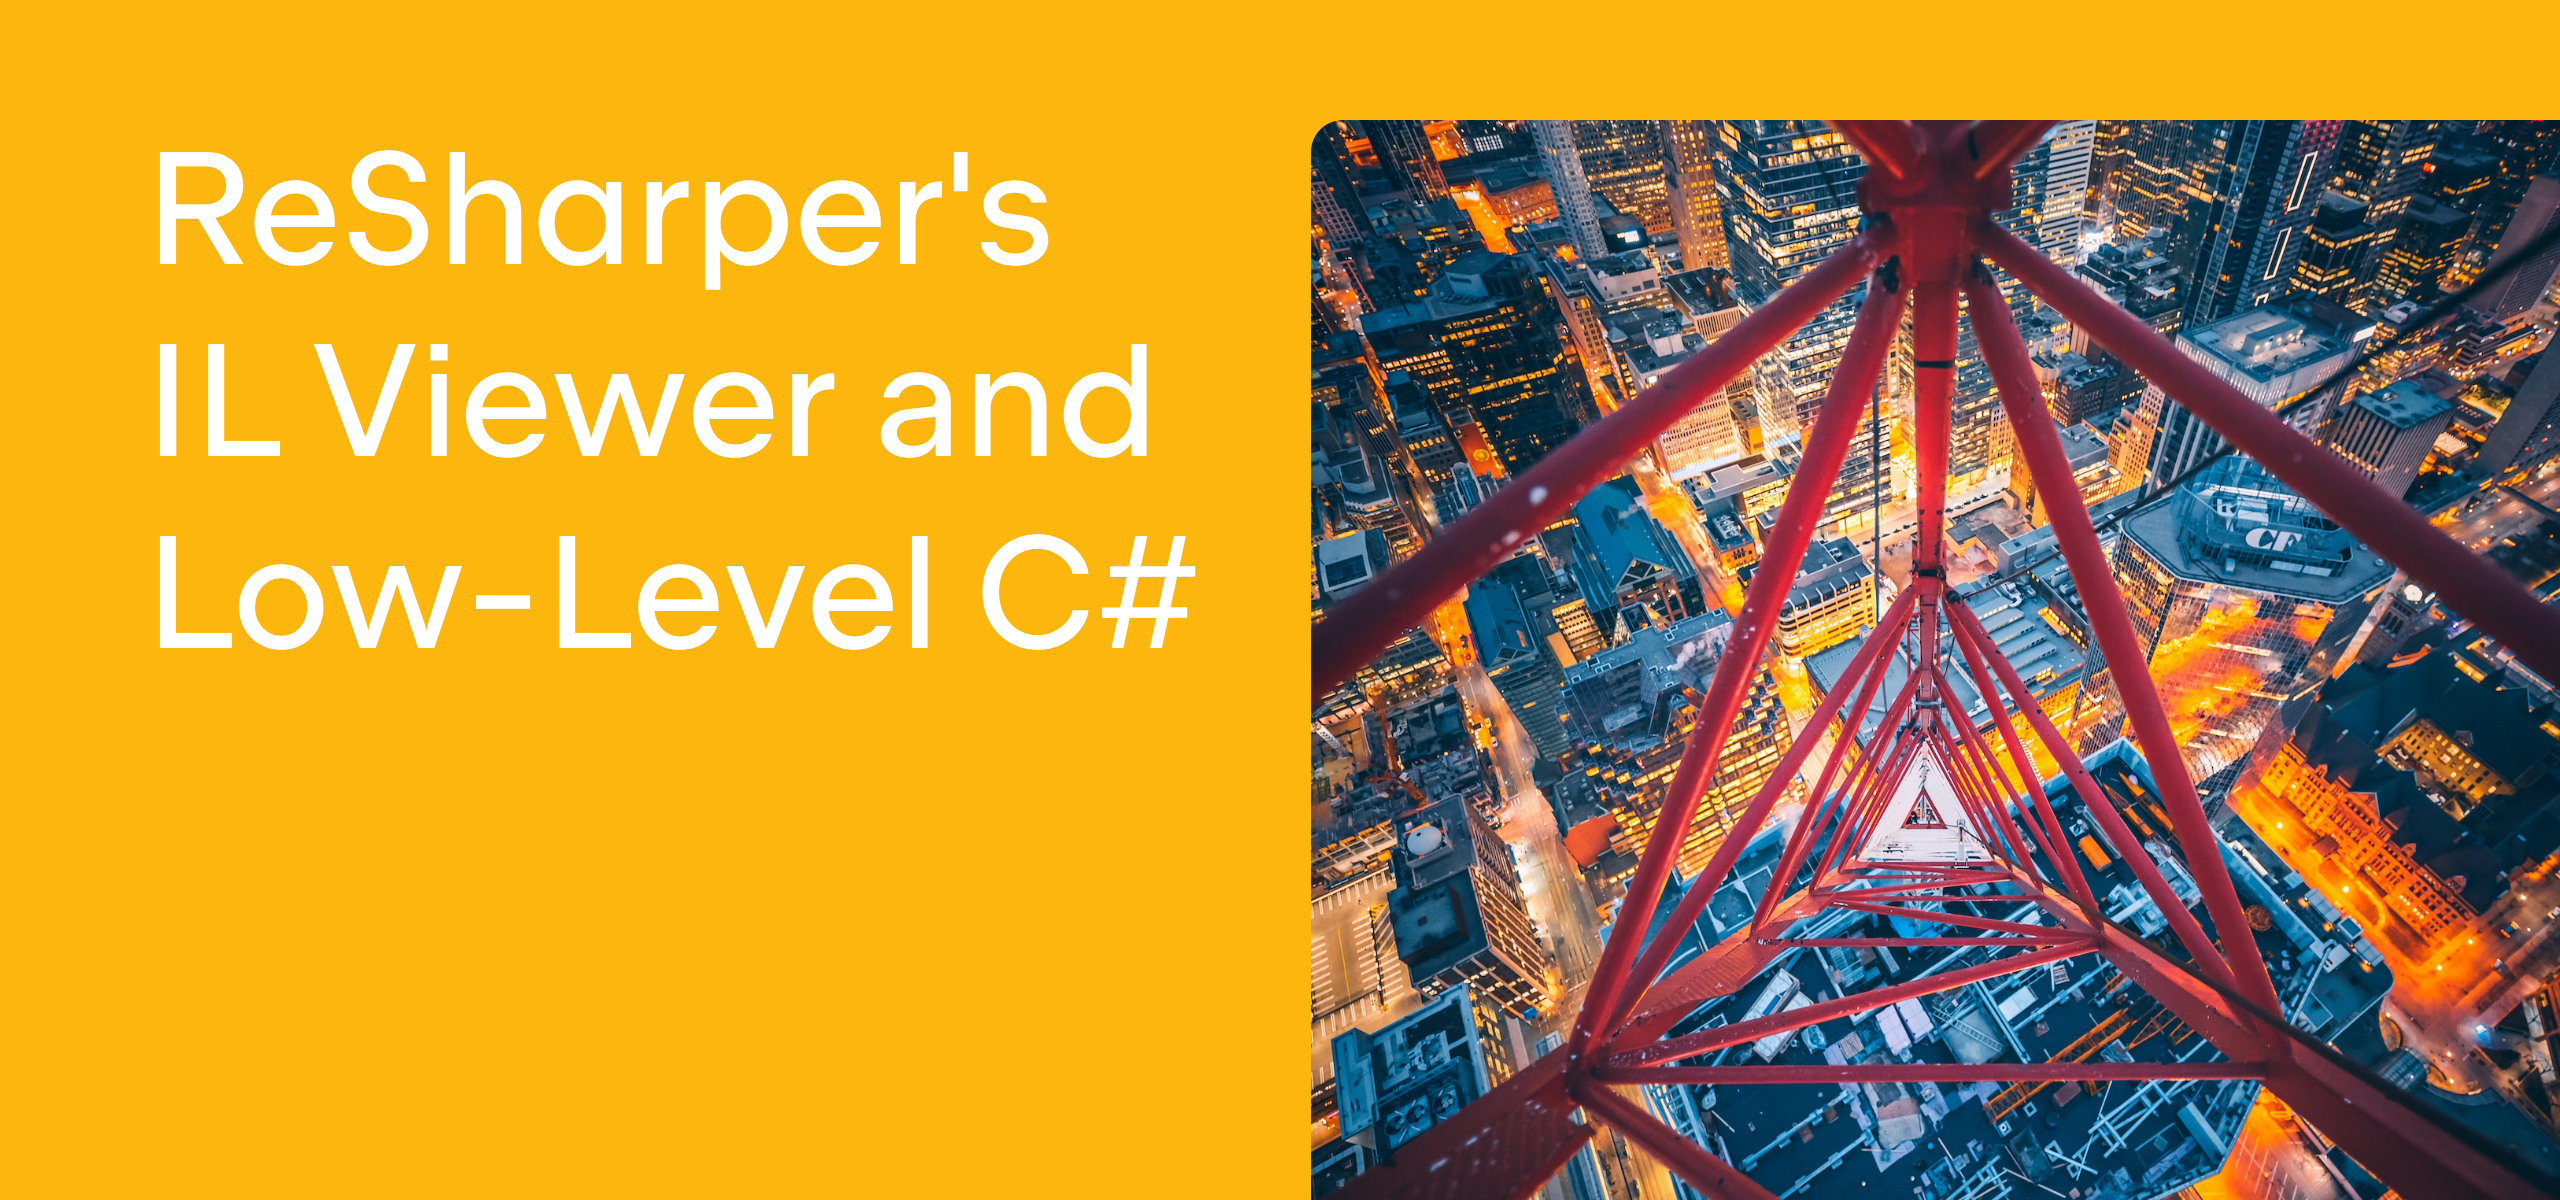 ReSharper's IL Viewer and Low-Level C#